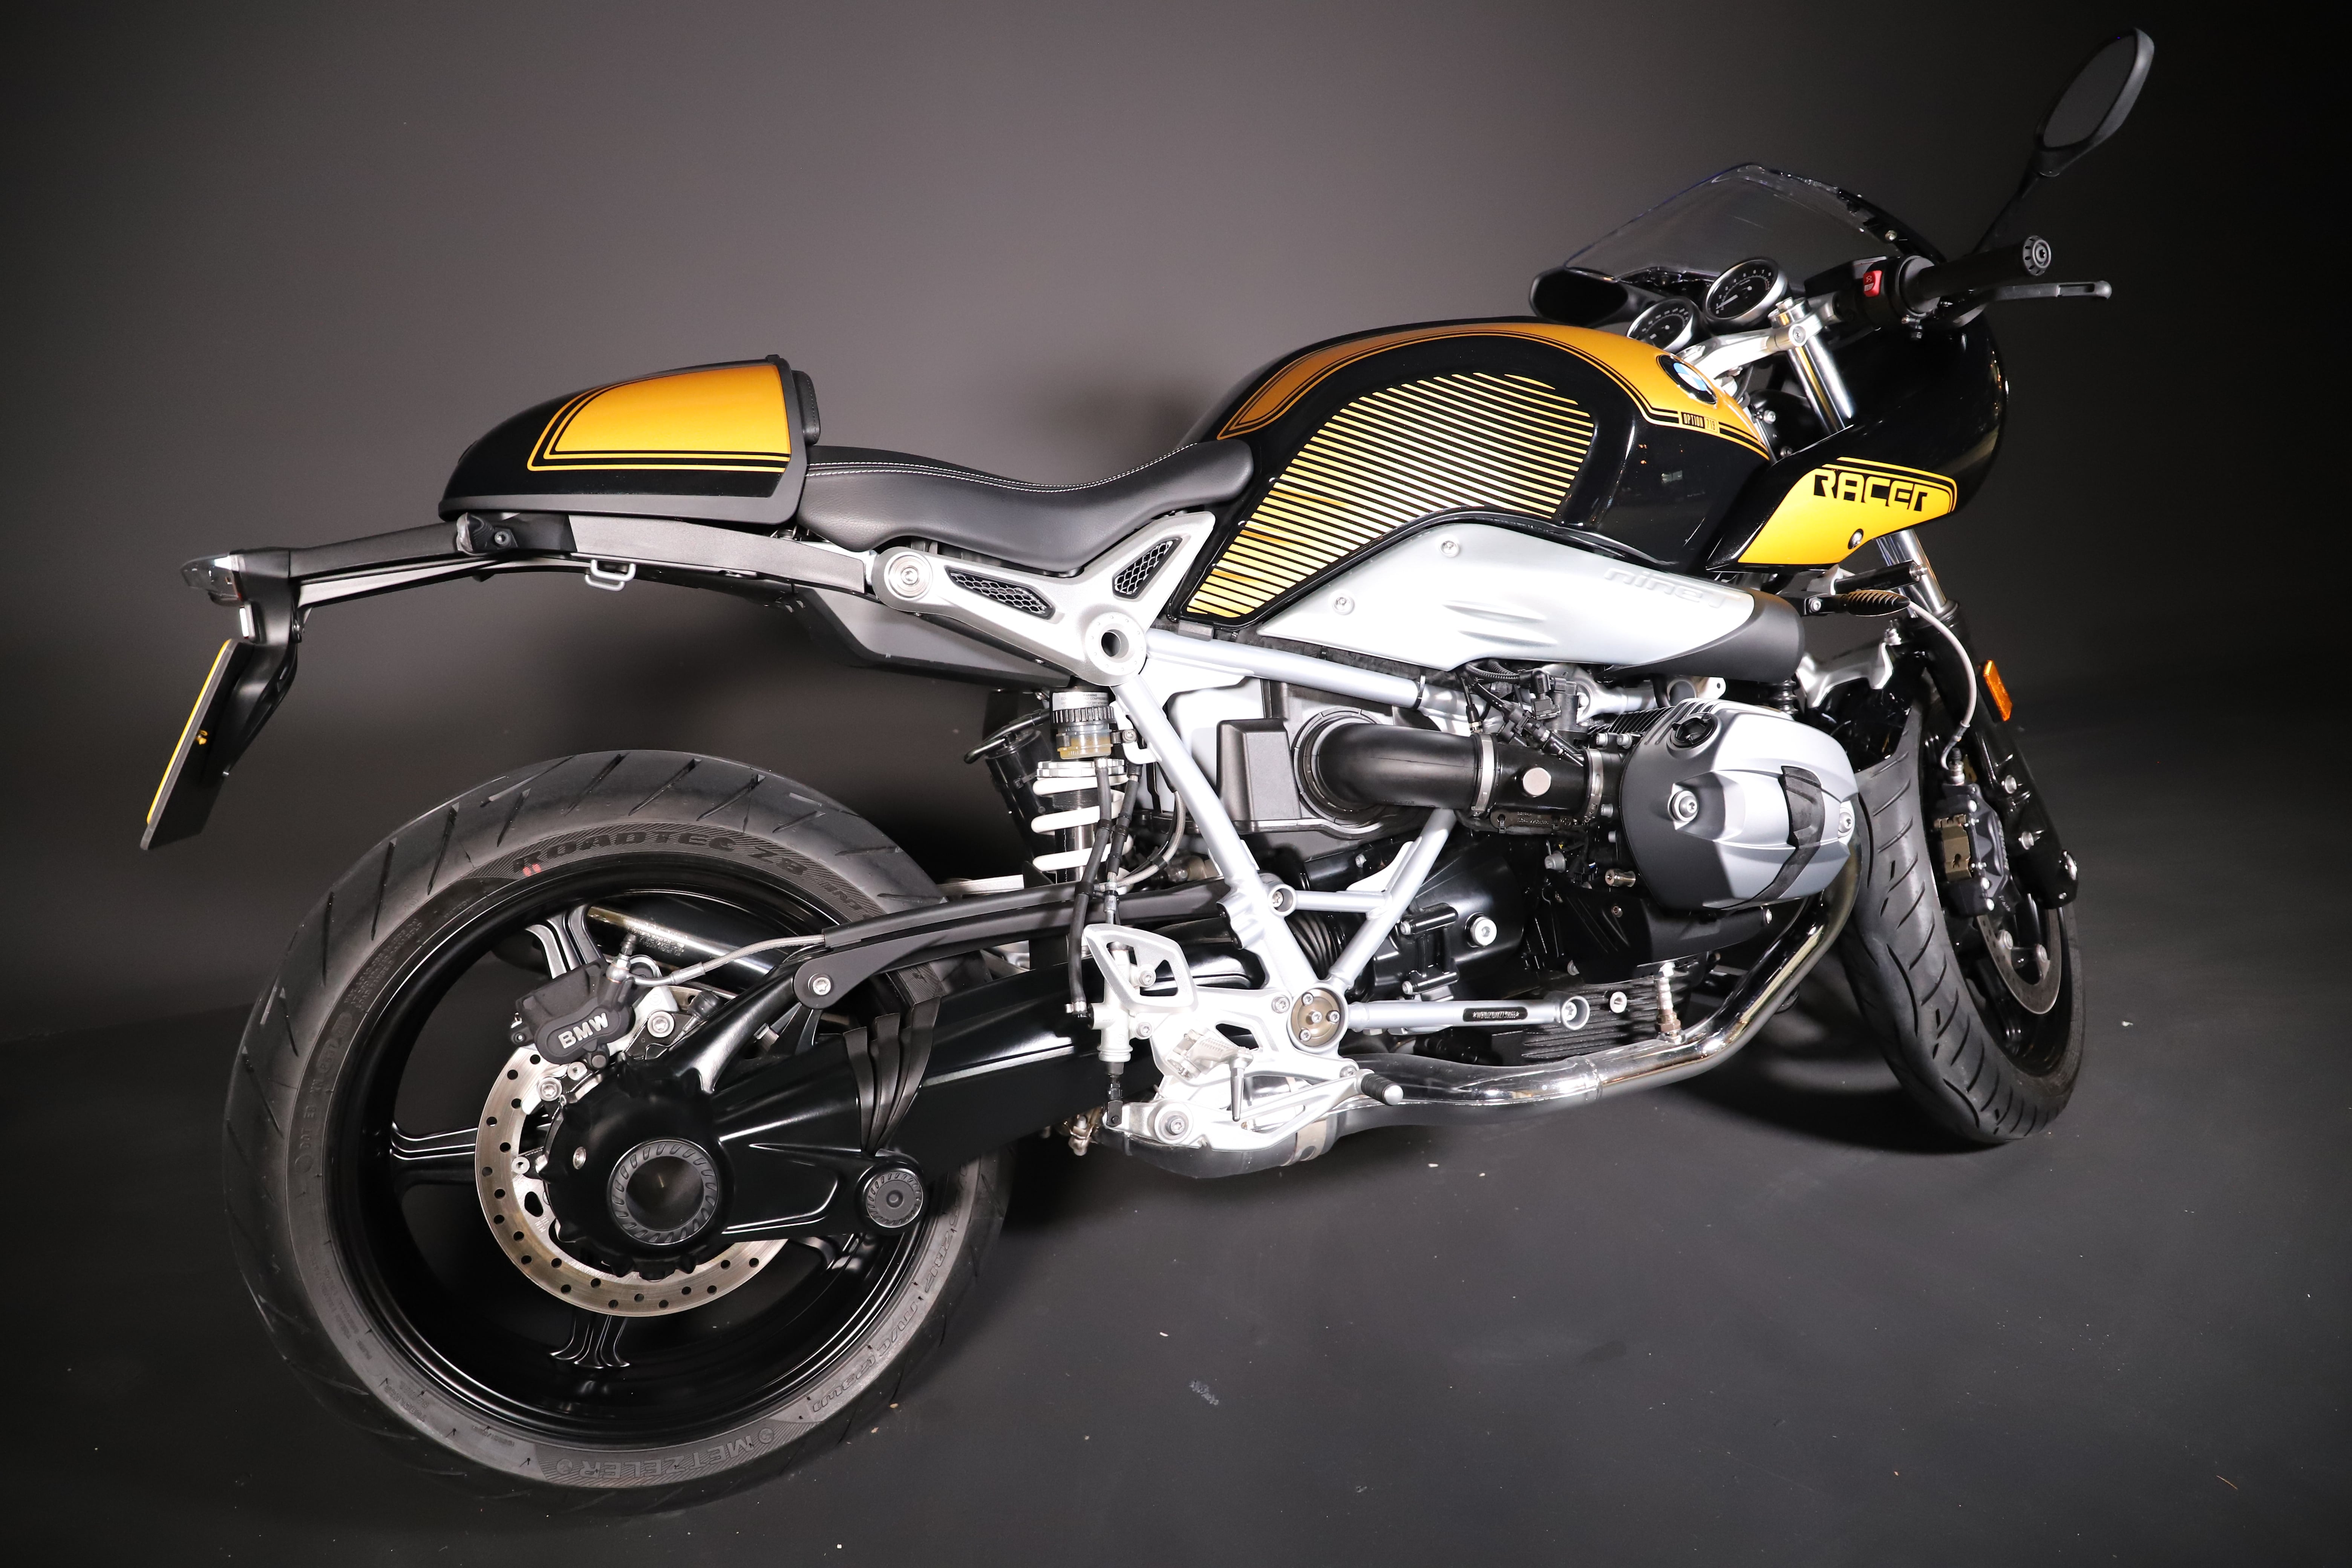 Bmw R 9 T Racer - BMW R Nine T Racer Motorcycle | Uncrate / Far removed